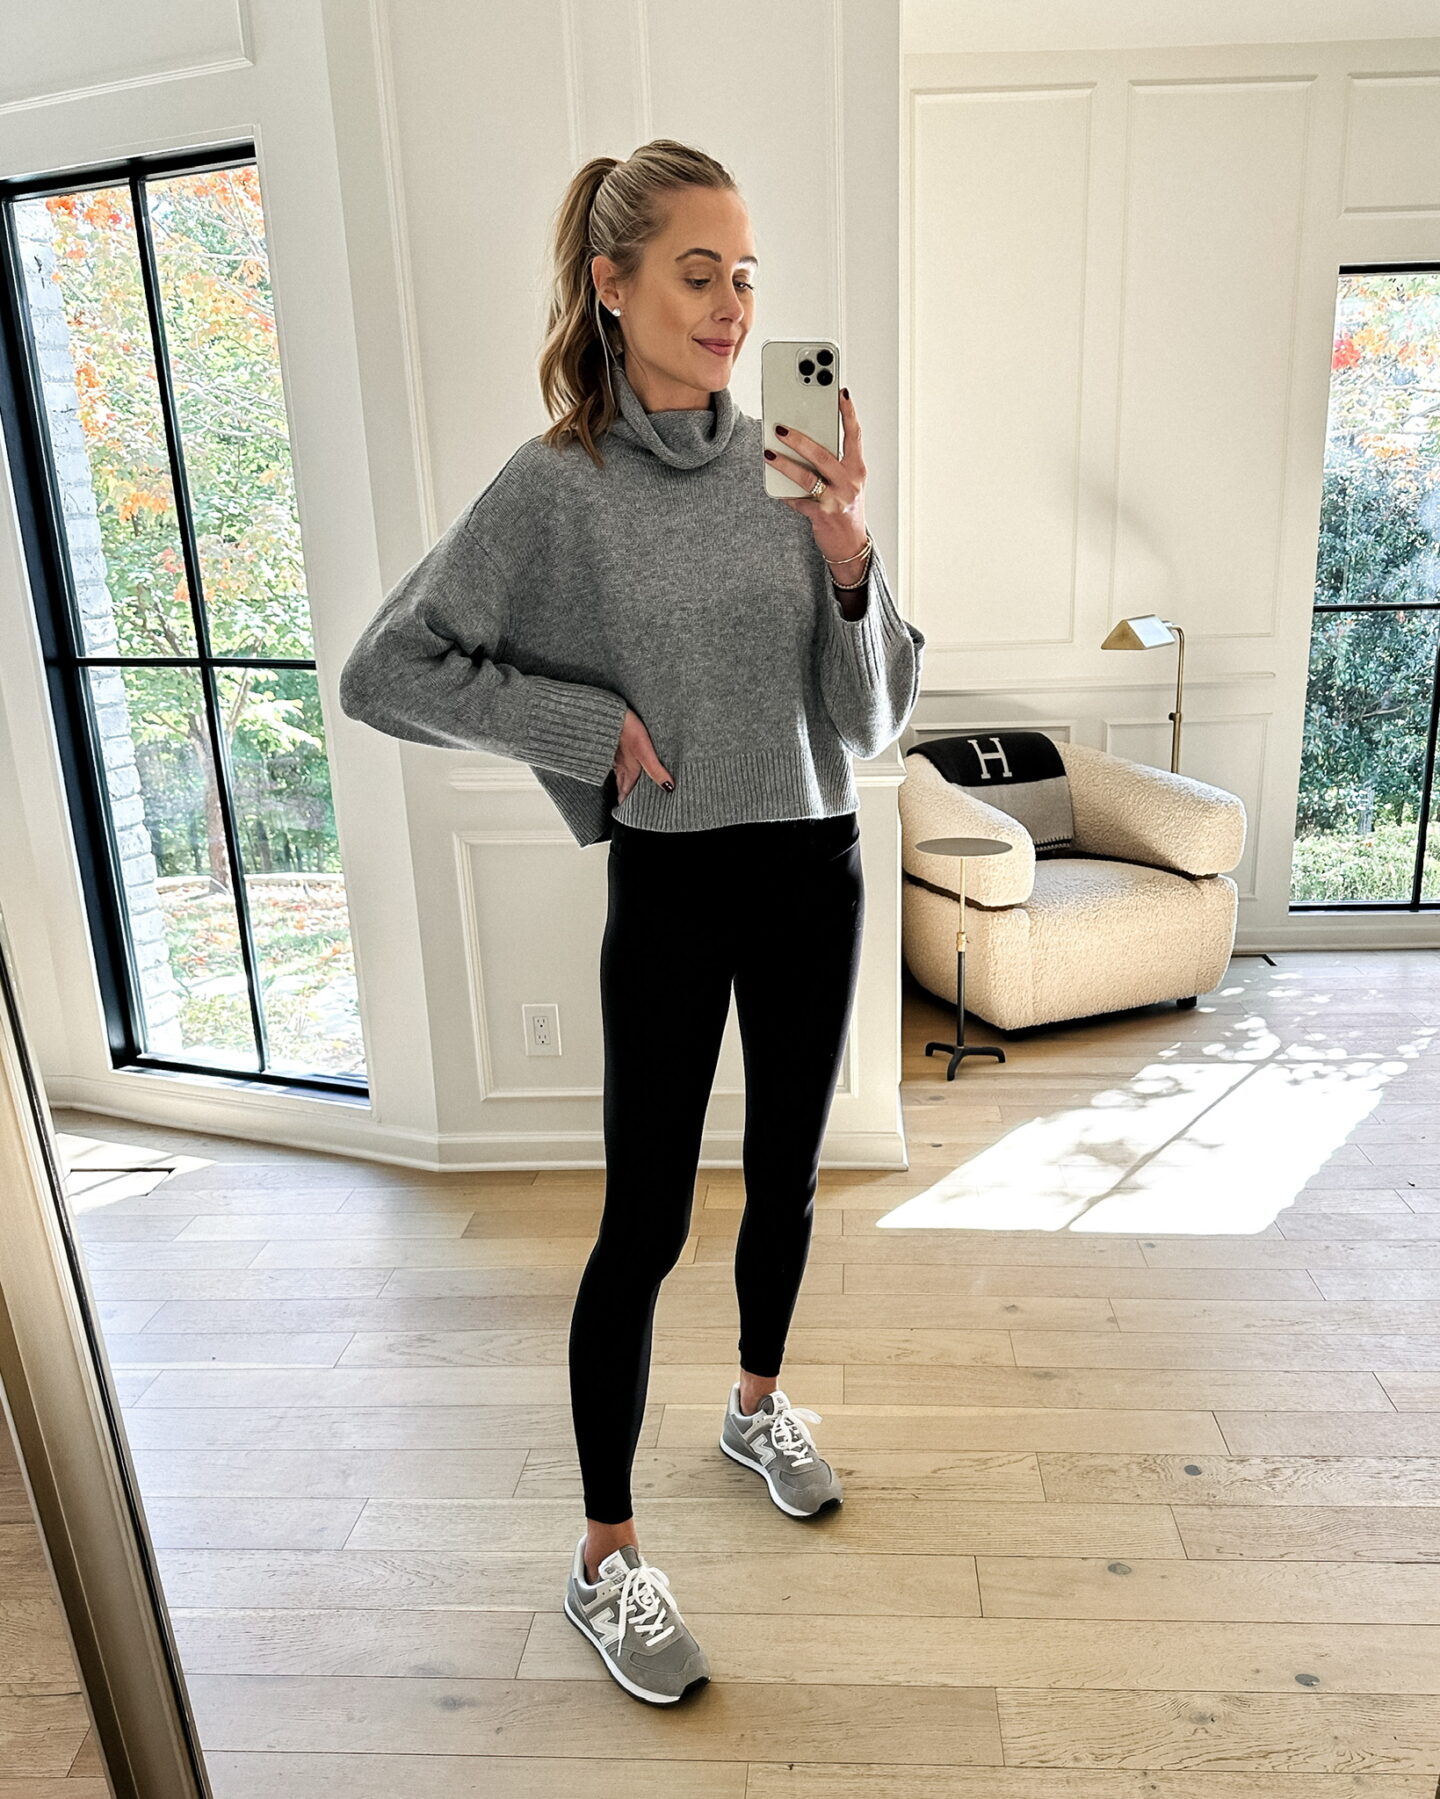 Fashion Jackson Wearing LouLou Studio Grey Turtleneck Sweater lululemon Black Leggings New Balance 574 Sneakers Casual Outfit Athleisure Fall Outfit